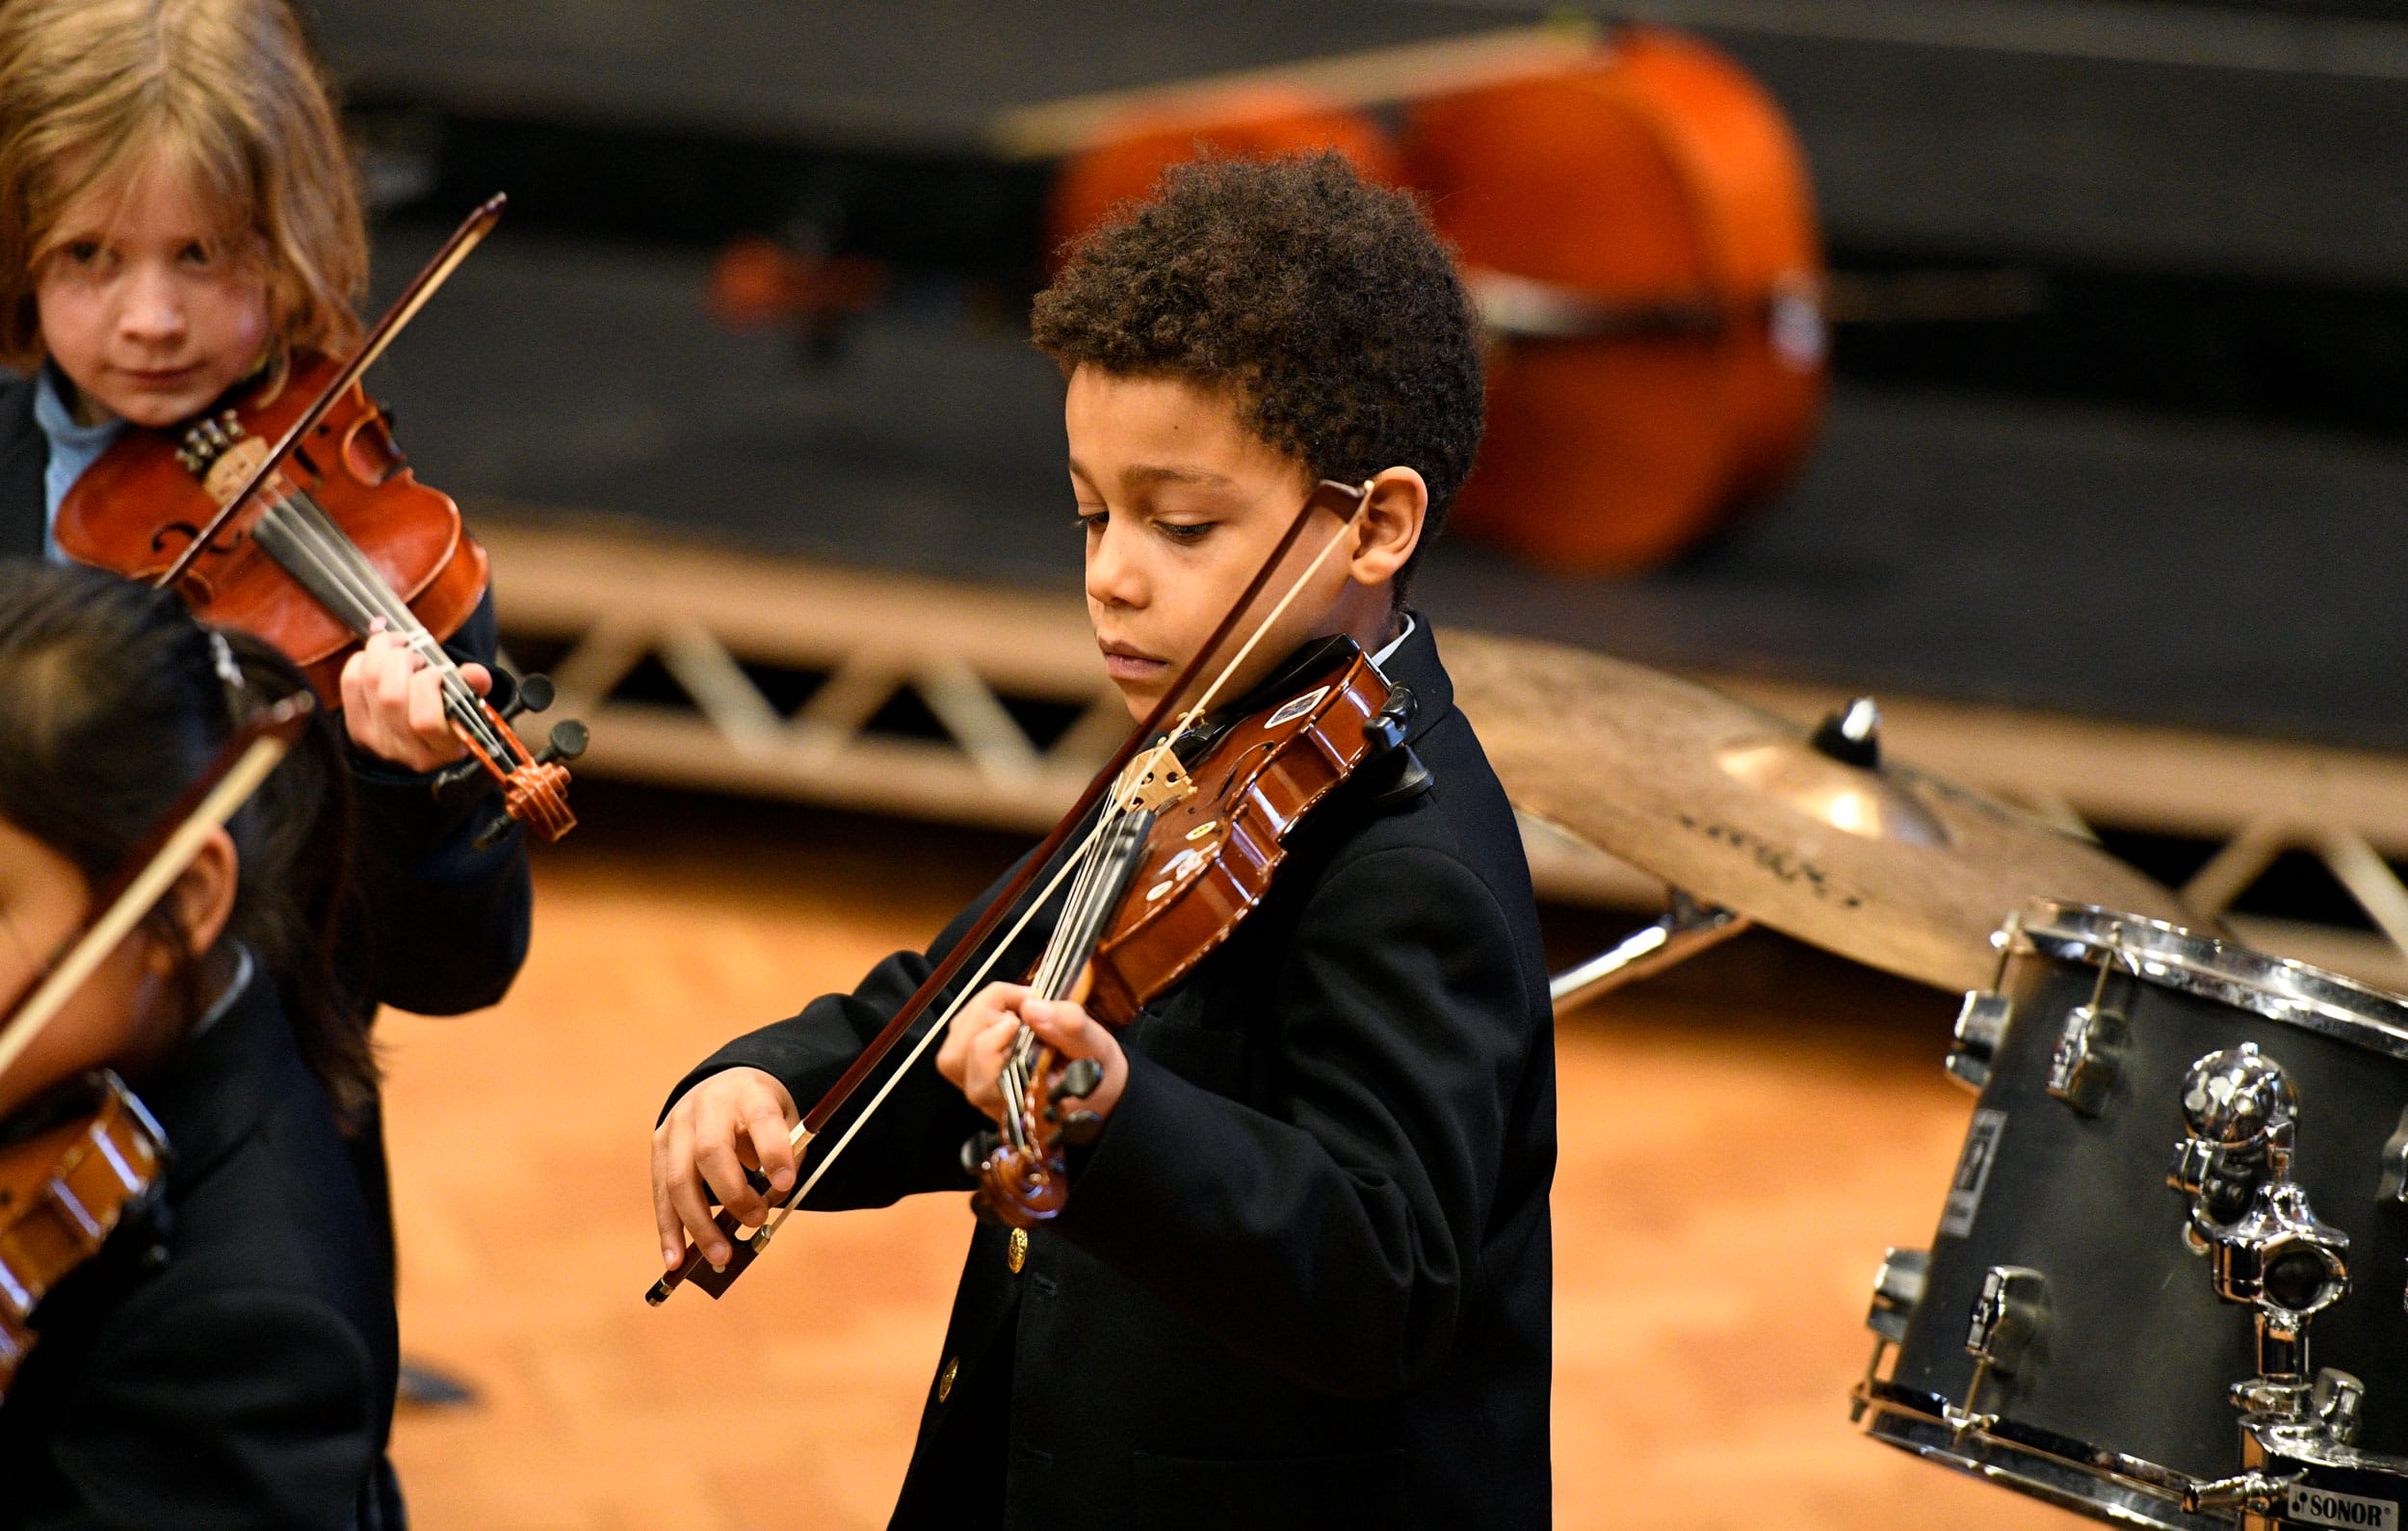 A boy playing the violin at a concert.